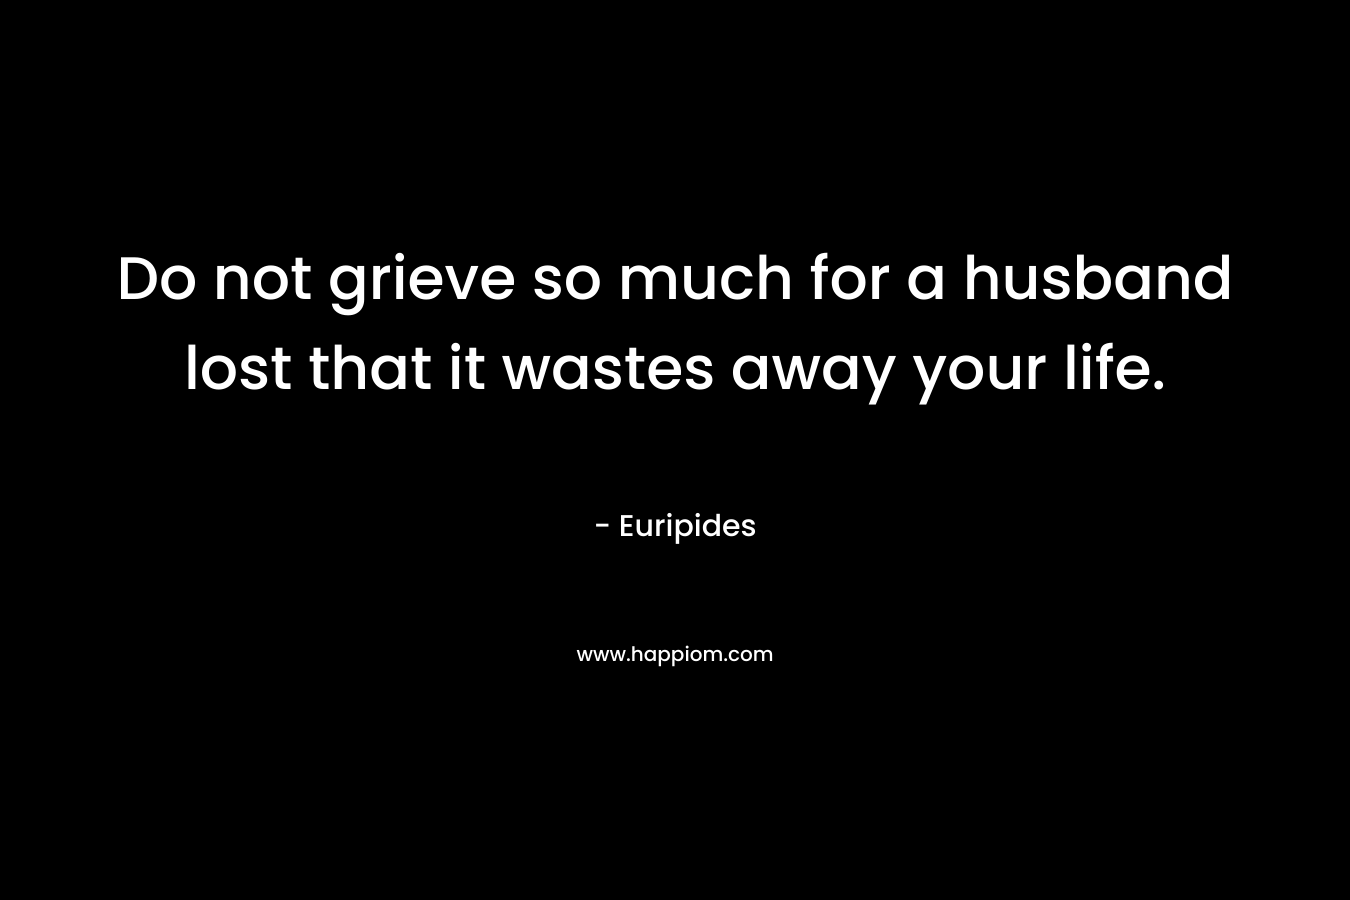 Do not grieve so much for a husband lost that it wastes away your life.